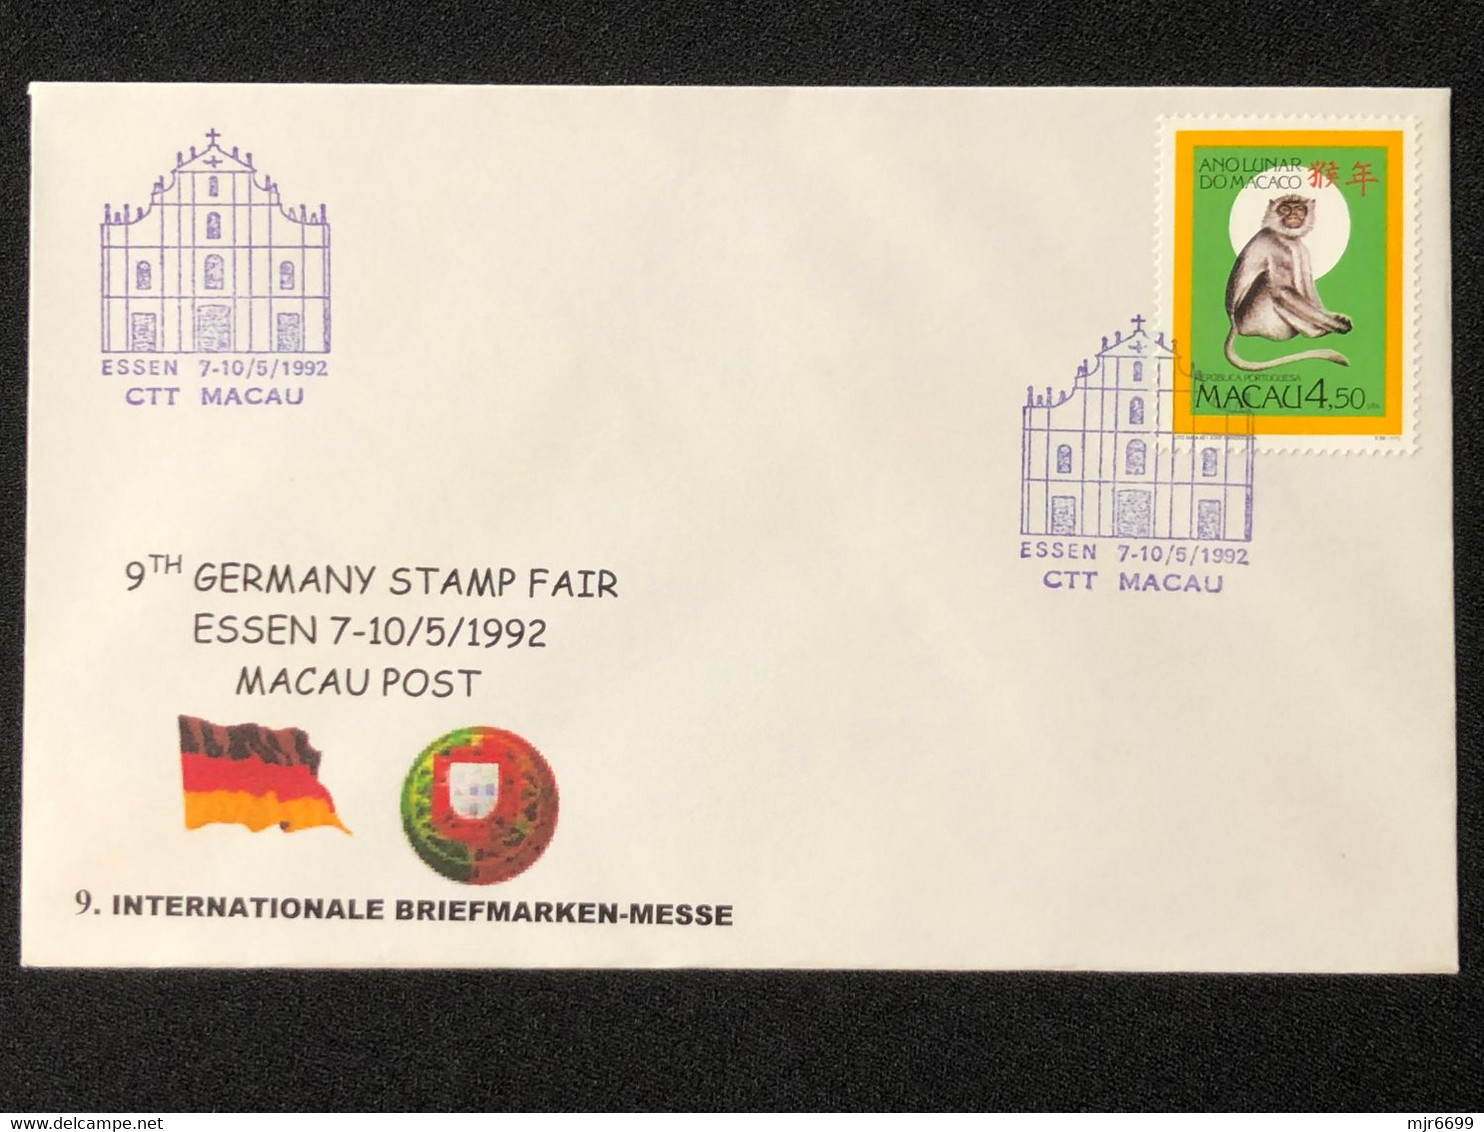 MACAU 9TH GERMANY STAMP FAIR 92 ESSEN COMMEMORATIVE CANCELLATION ON COVER - Lettres & Documents